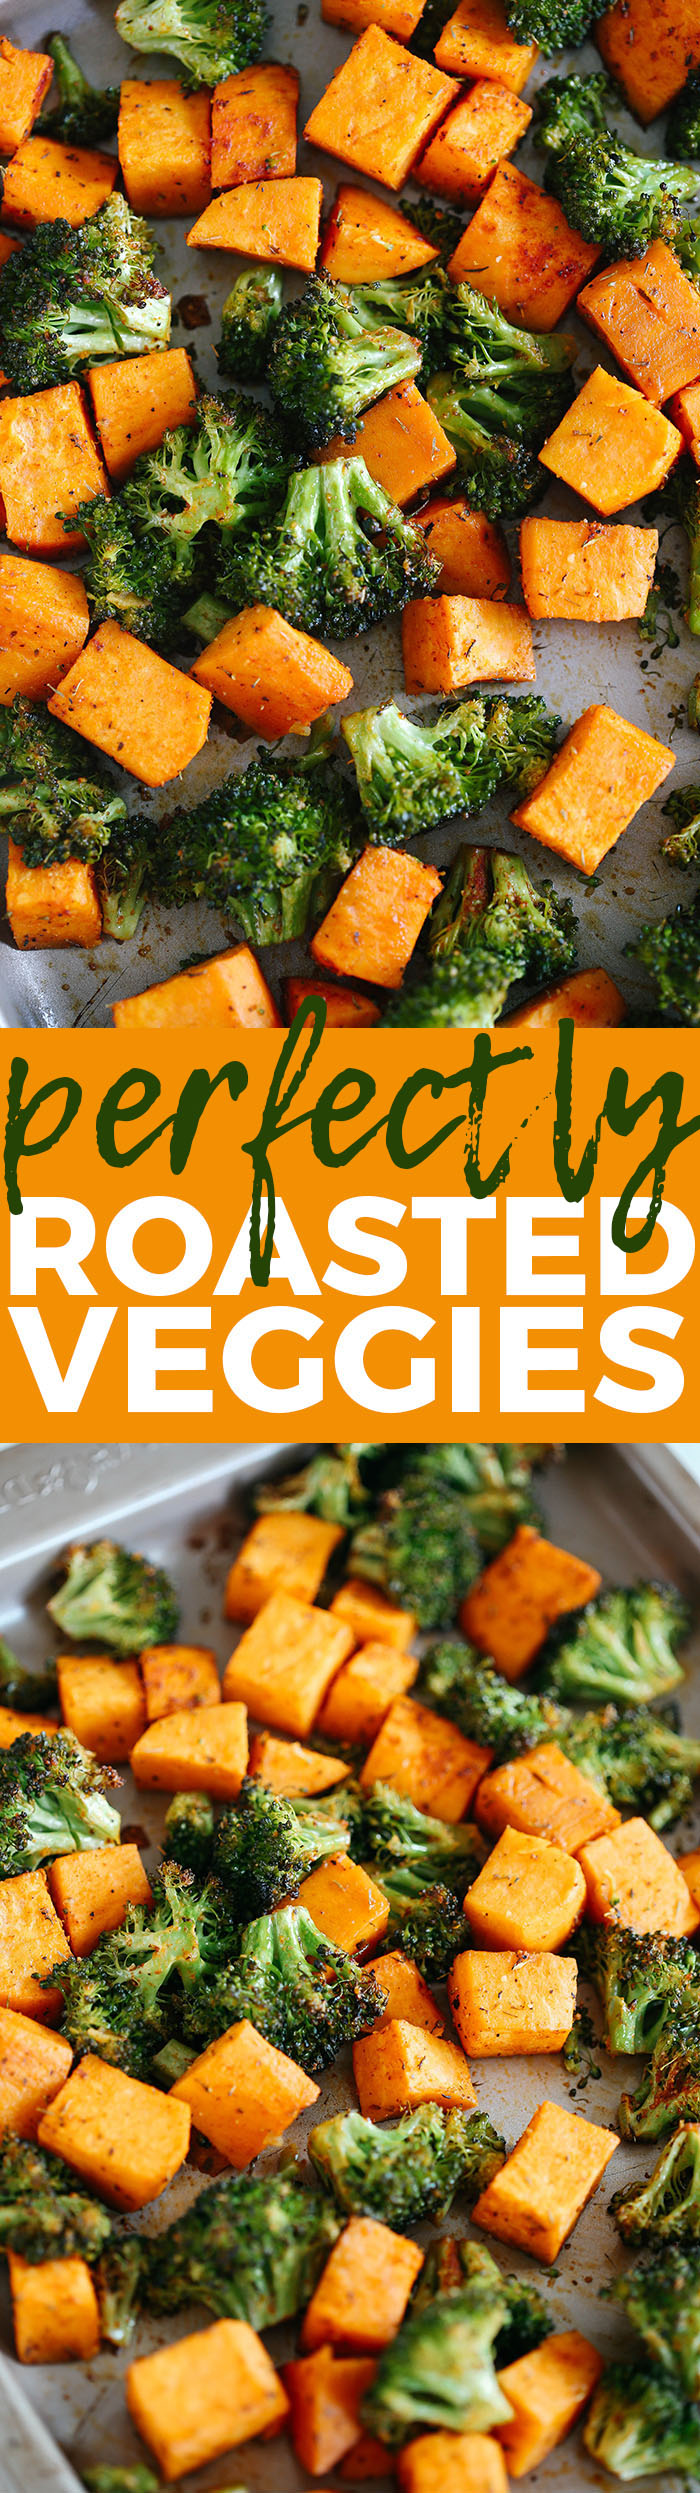 These Perfectly Roasted Broccoli and Sweet Potatoes make a delicious healthy side dish and are seasoned to perfection!